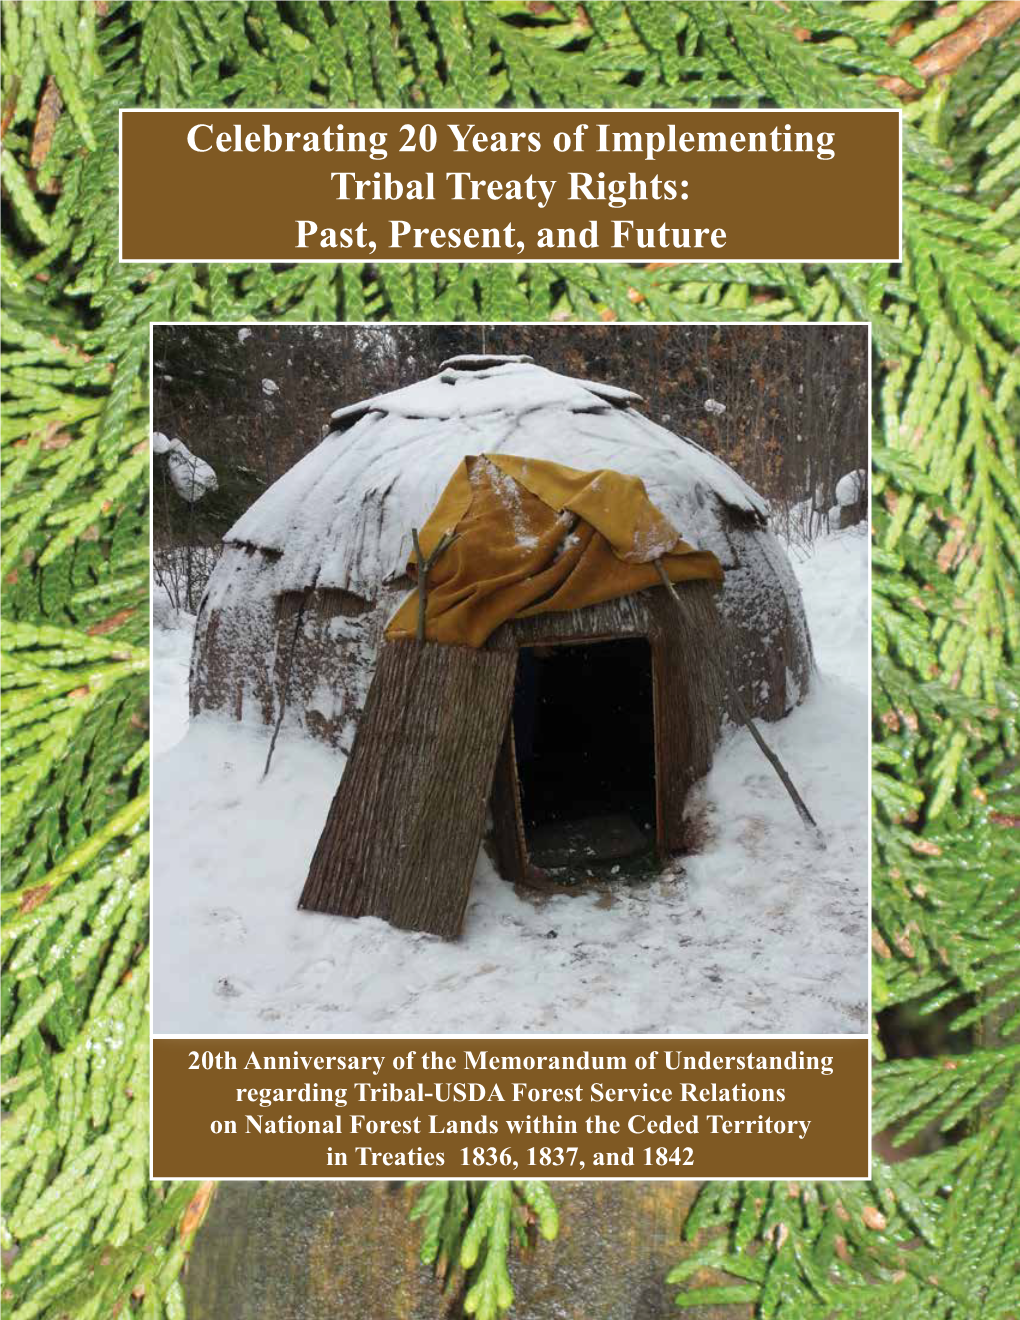 Celebrating 20 Years of Implementing Tribal Treaty Rights: Past, Present, and Future